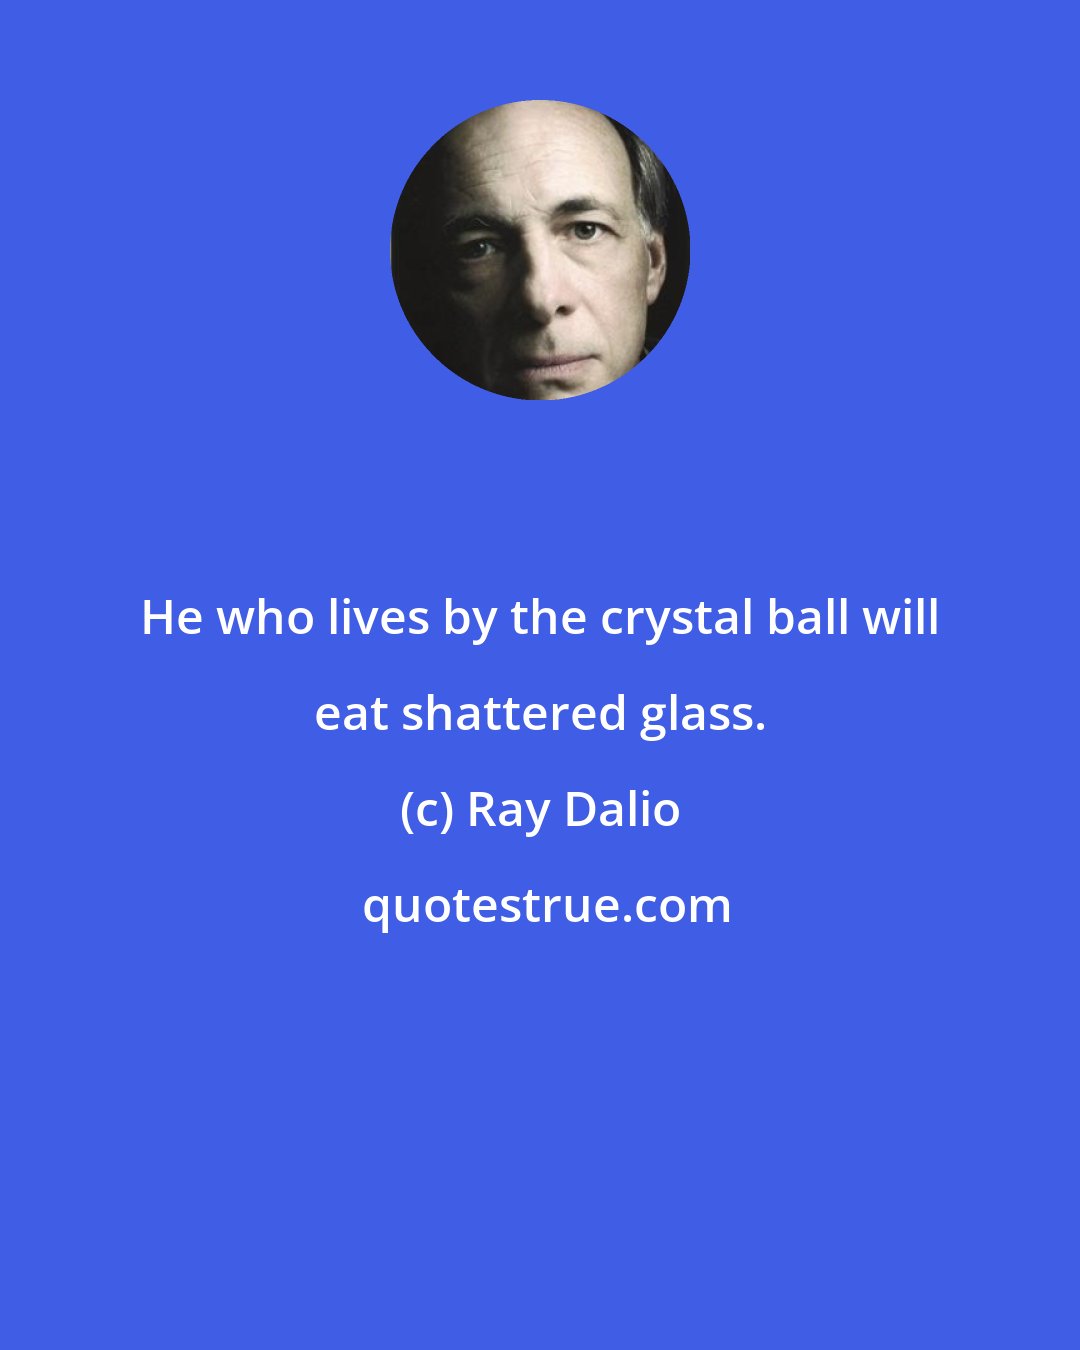 Ray Dalio: He who lives by the crystal ball will eat shattered glass.